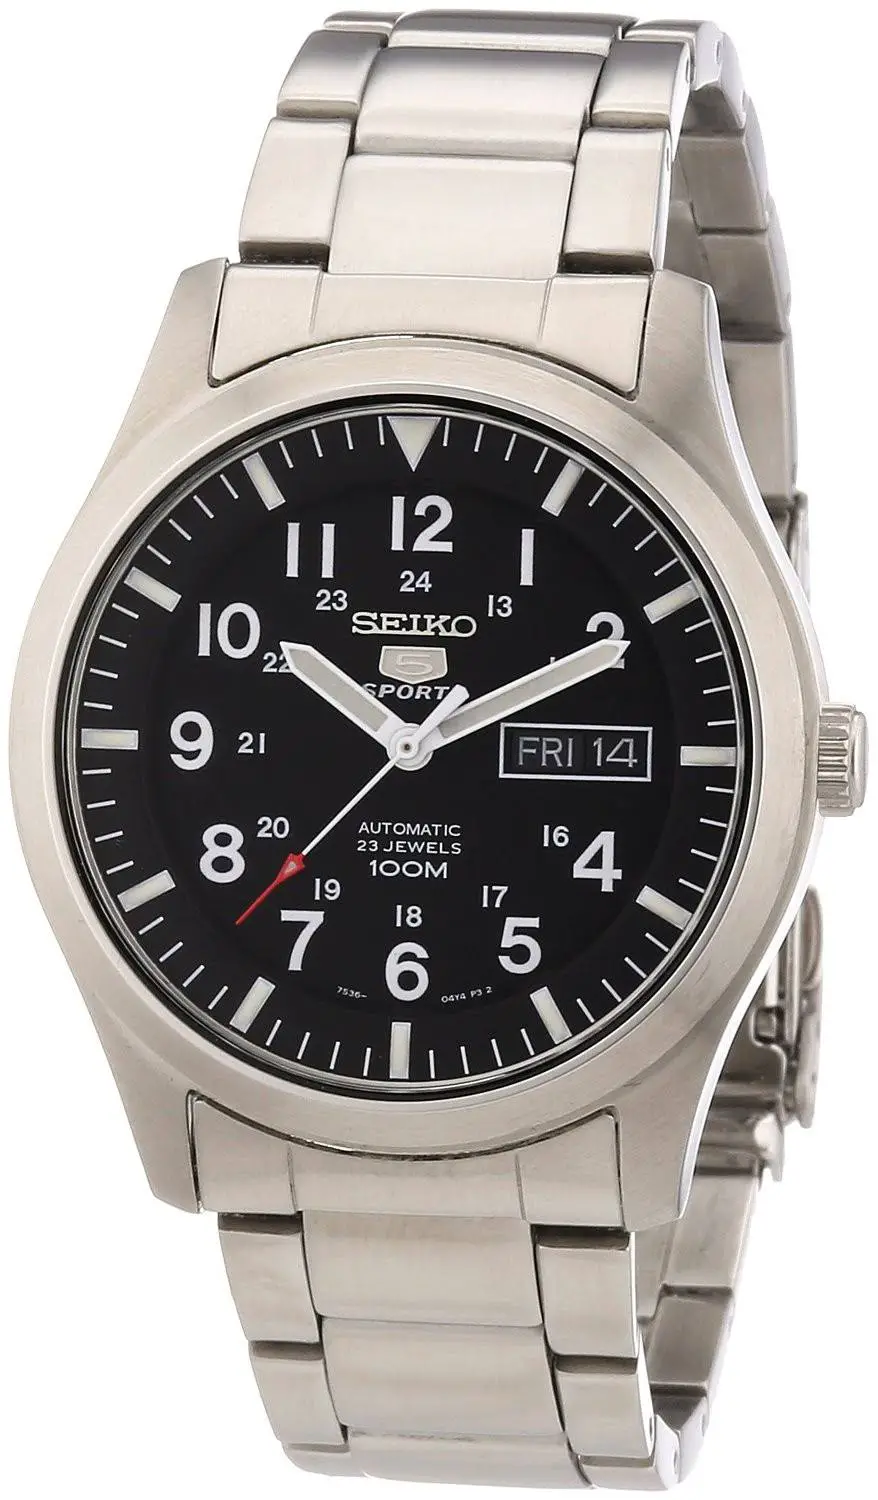 Seiko 5 Automatic Men's Watch SNZG13 Review SNZG13K1 - The Watch Blog